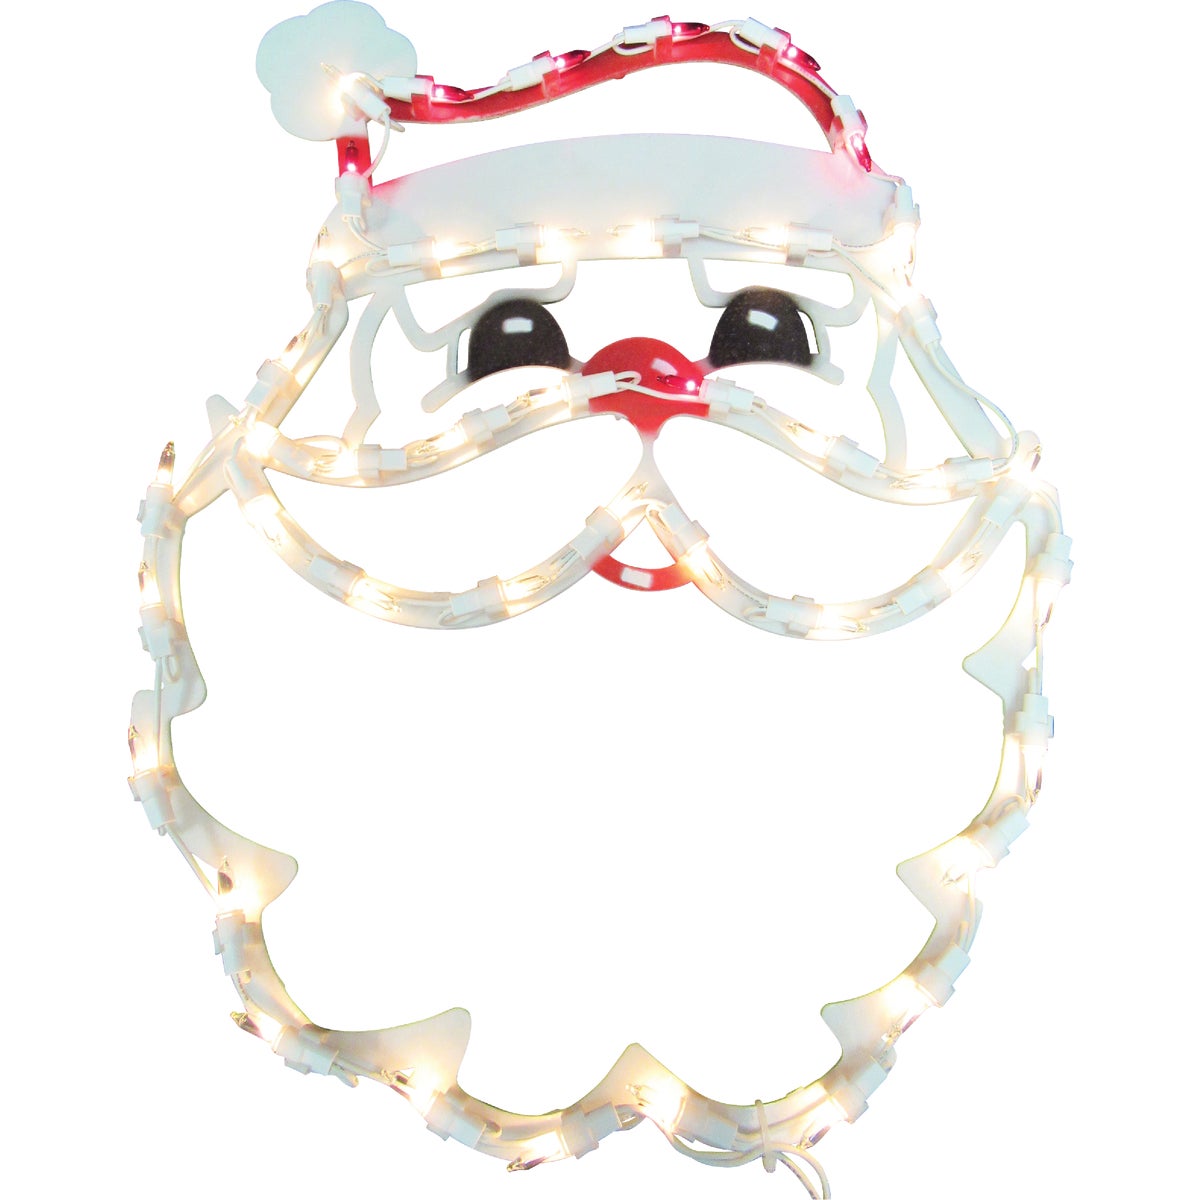 Item 900299, Lighted Santa face plaque ideal for holiday decorating.